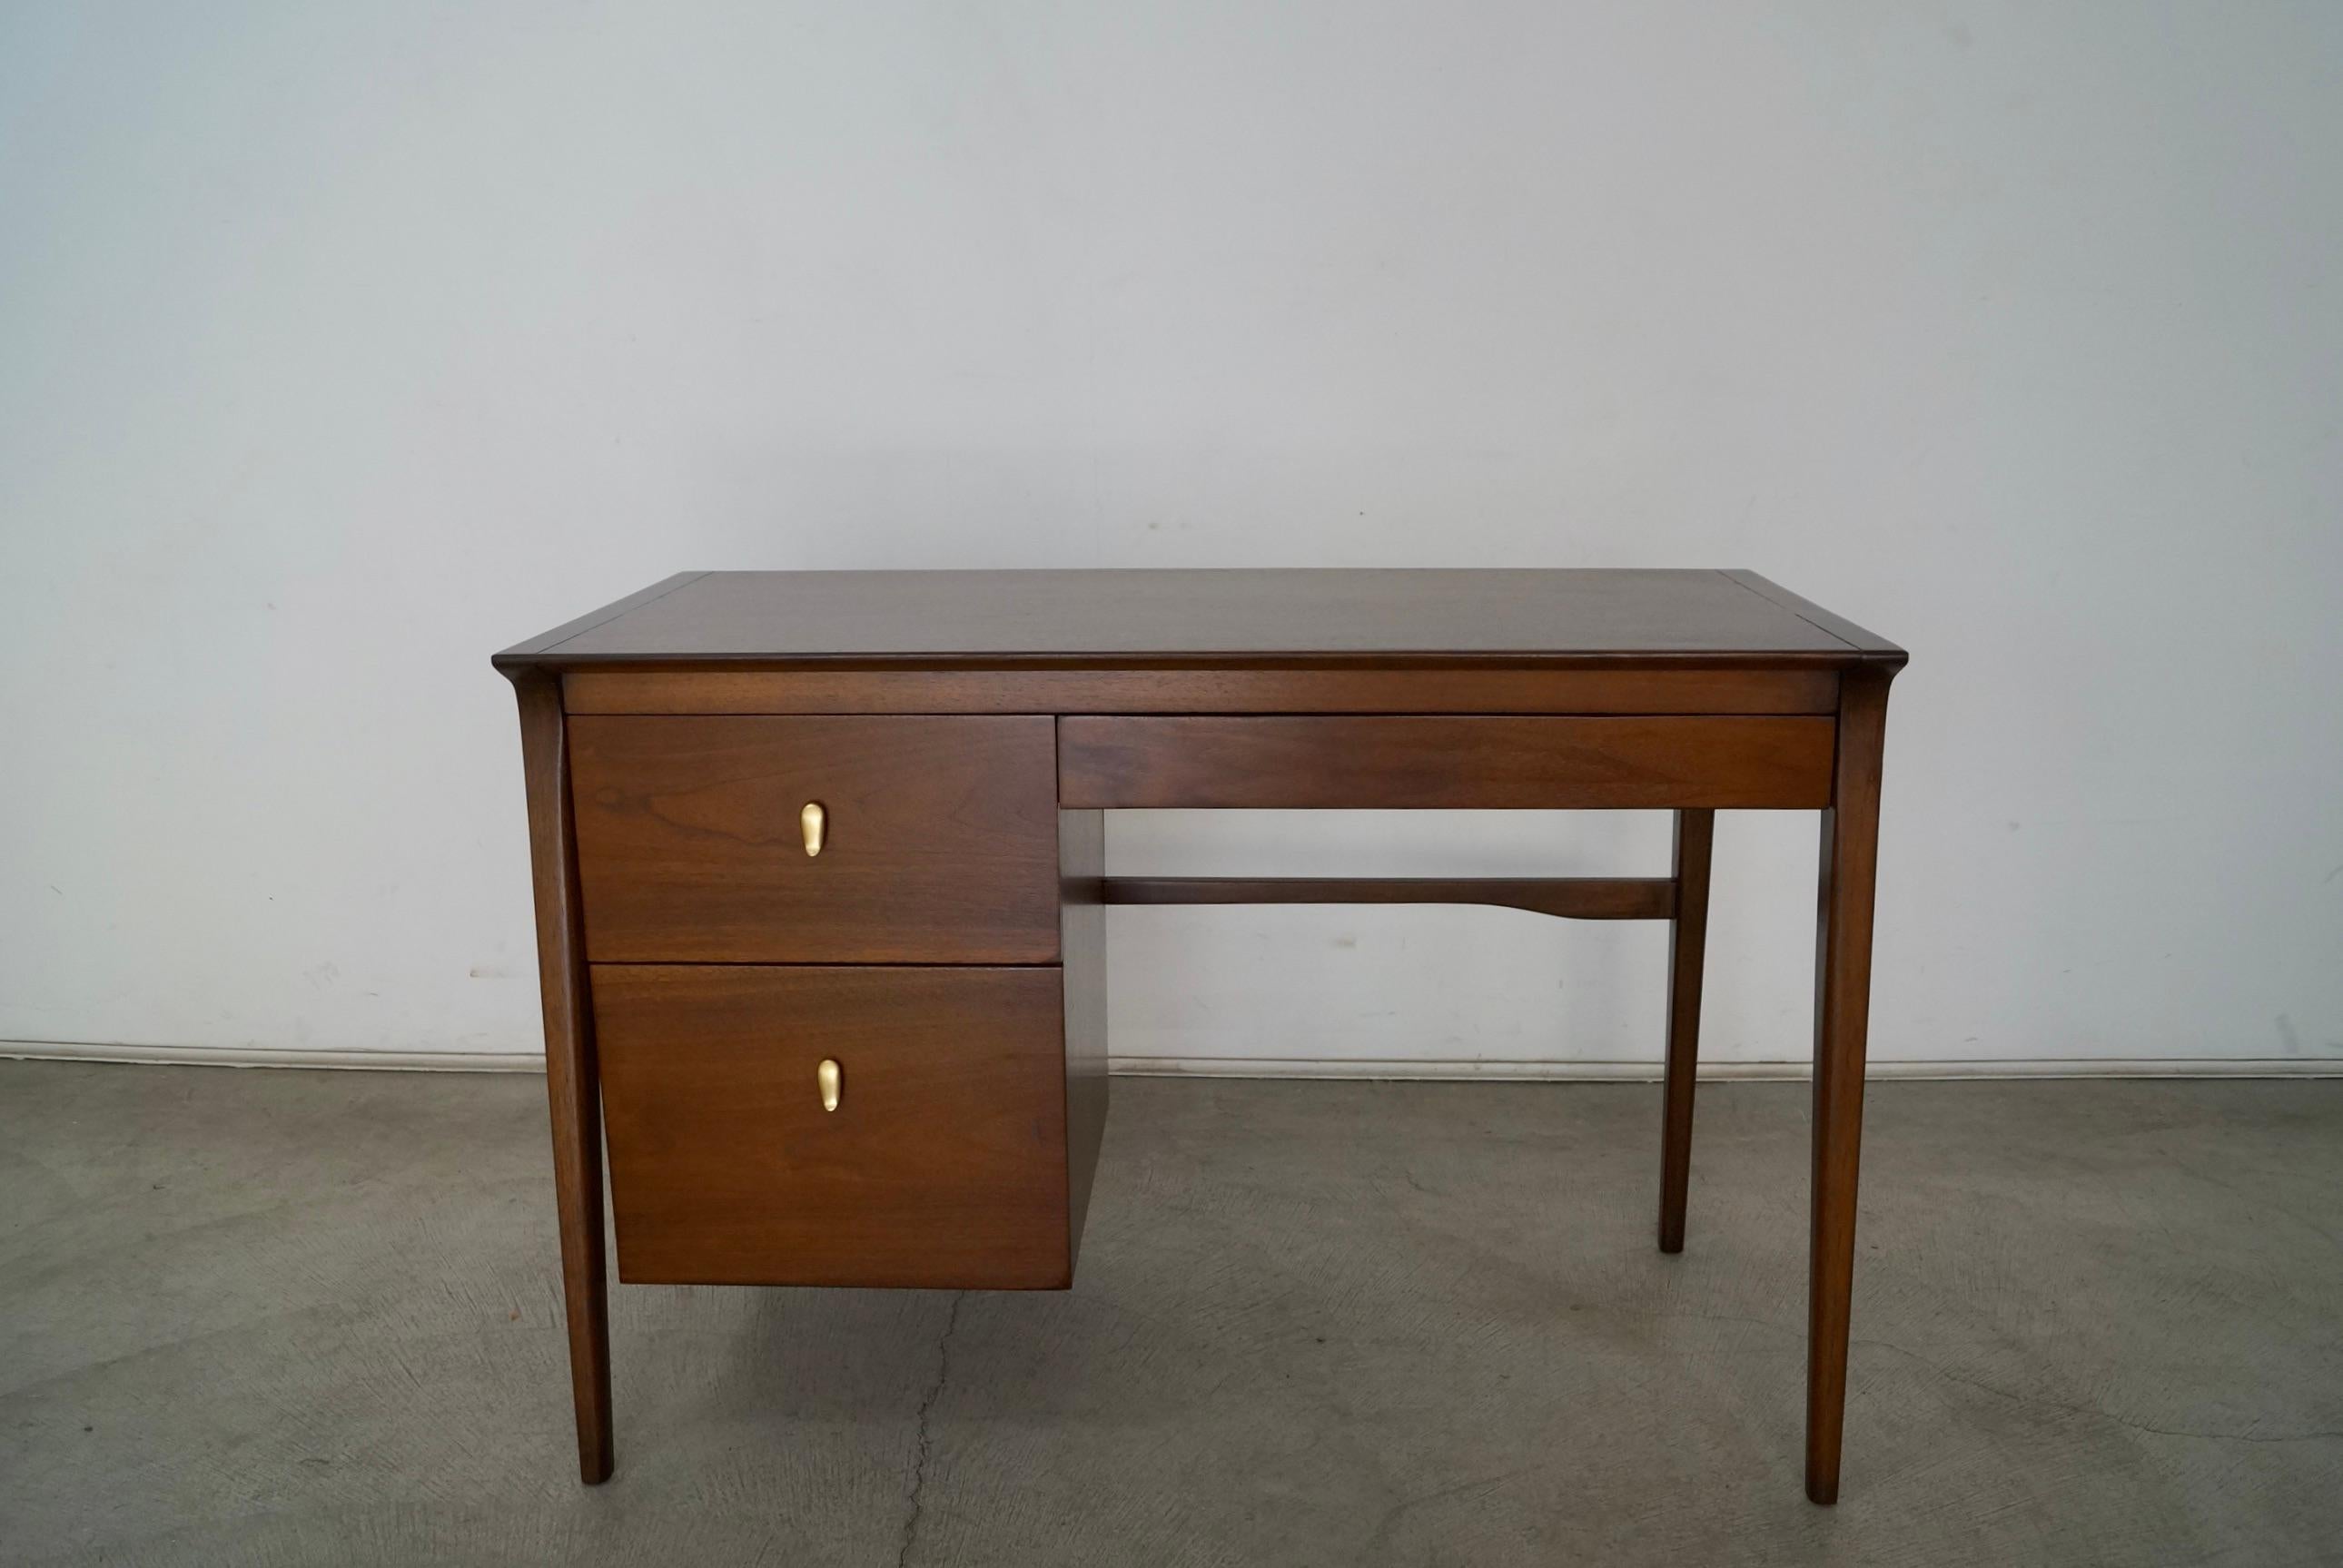 Vintage Mid-Century Modern desk for sale. Designed by John Van Koert for Drexel, and part of the collectible Profile series. It has been beautifully refinished in walnut, and has the original brass knobs. It has three drawers dovetailed on both